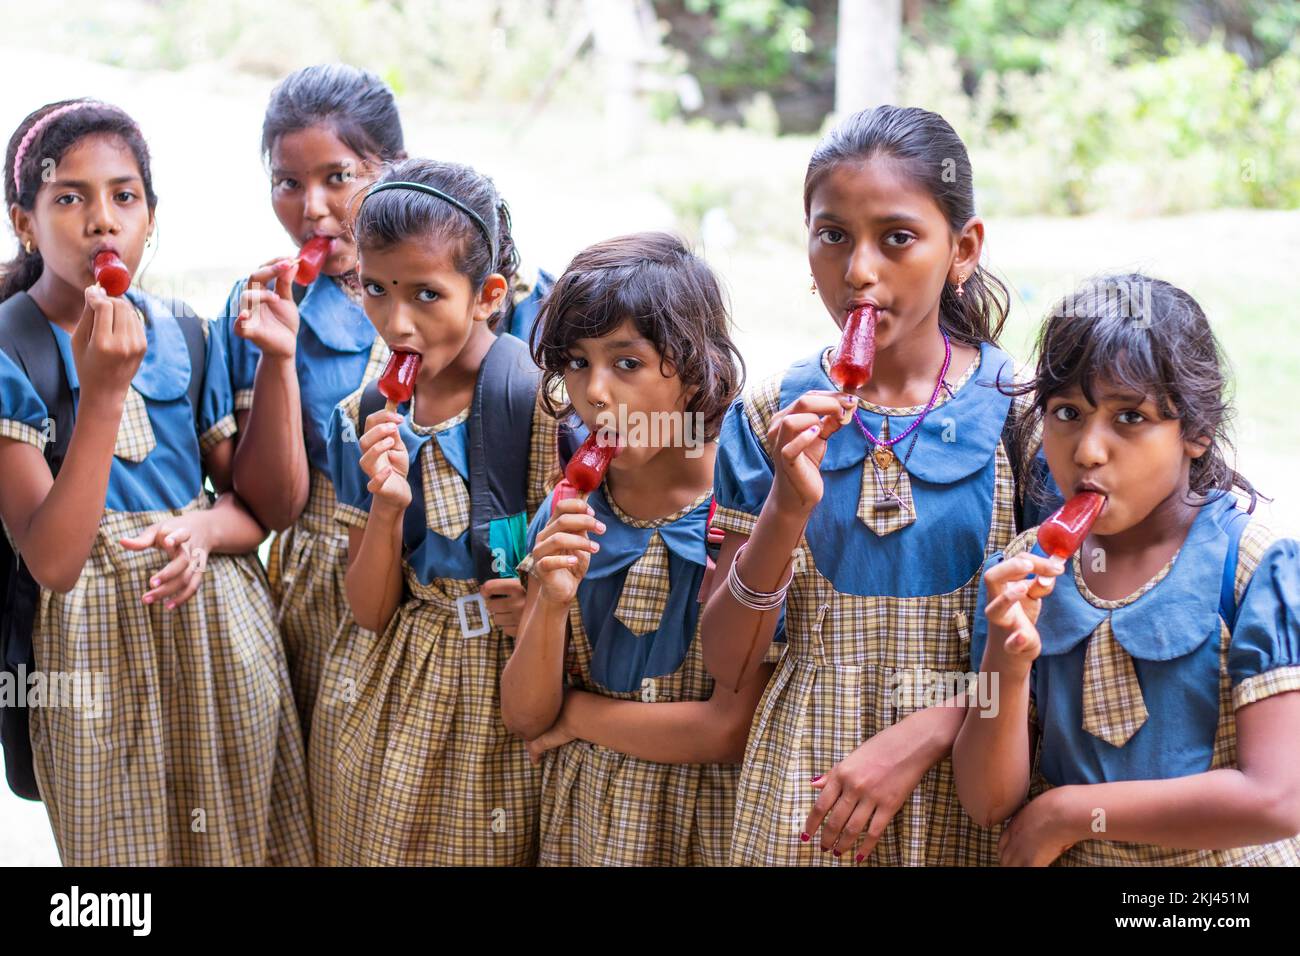 School Children's  eating an ice lolly in outdoor Stock Photo